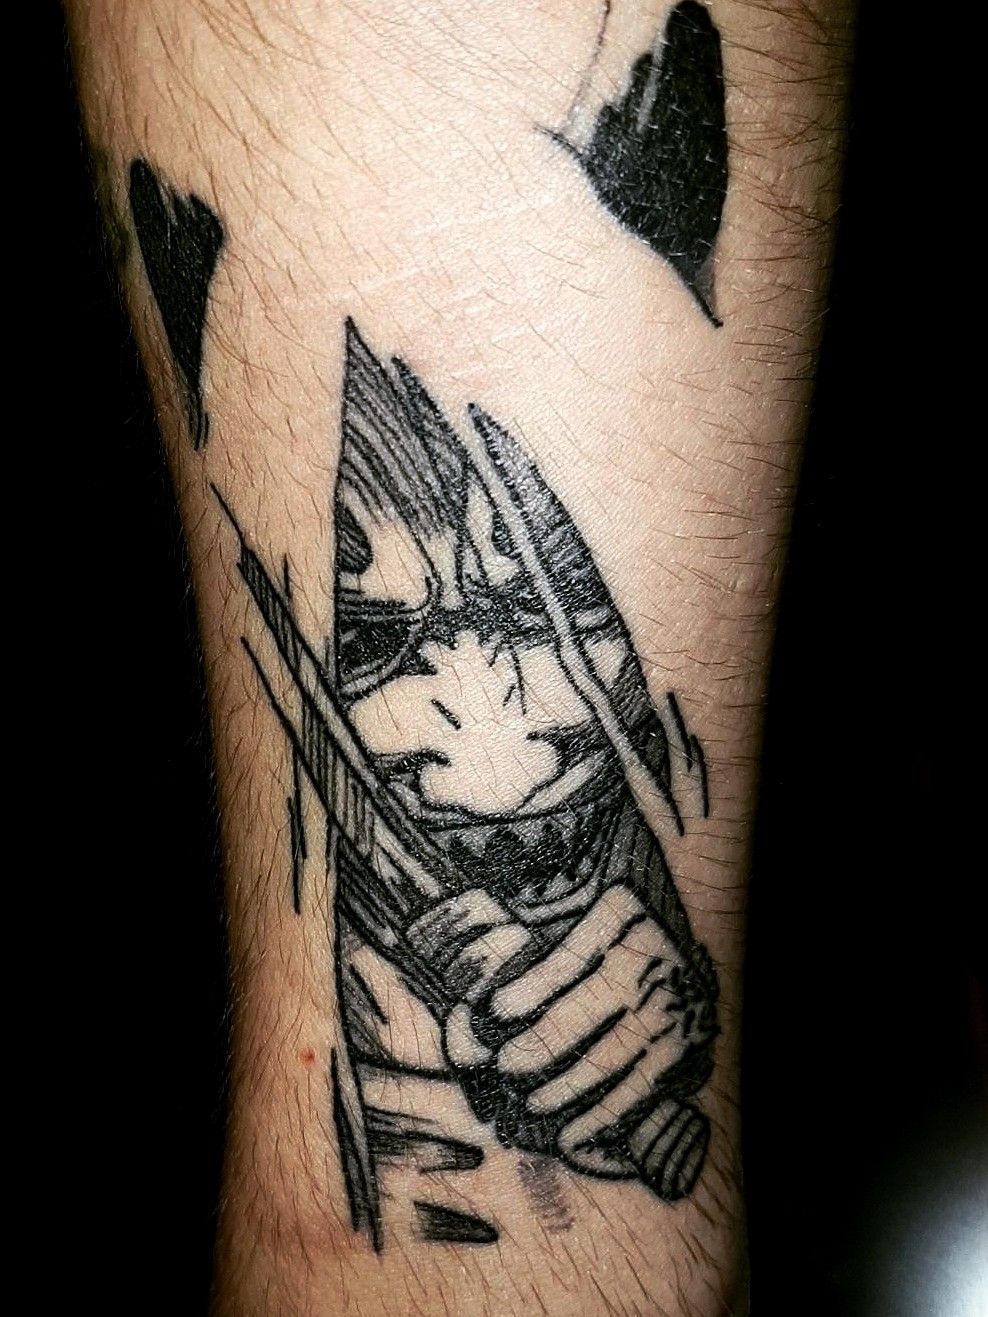 I know there are a ton of these but had to throw it out there  Reaper  death seal tattoo  rNaruto